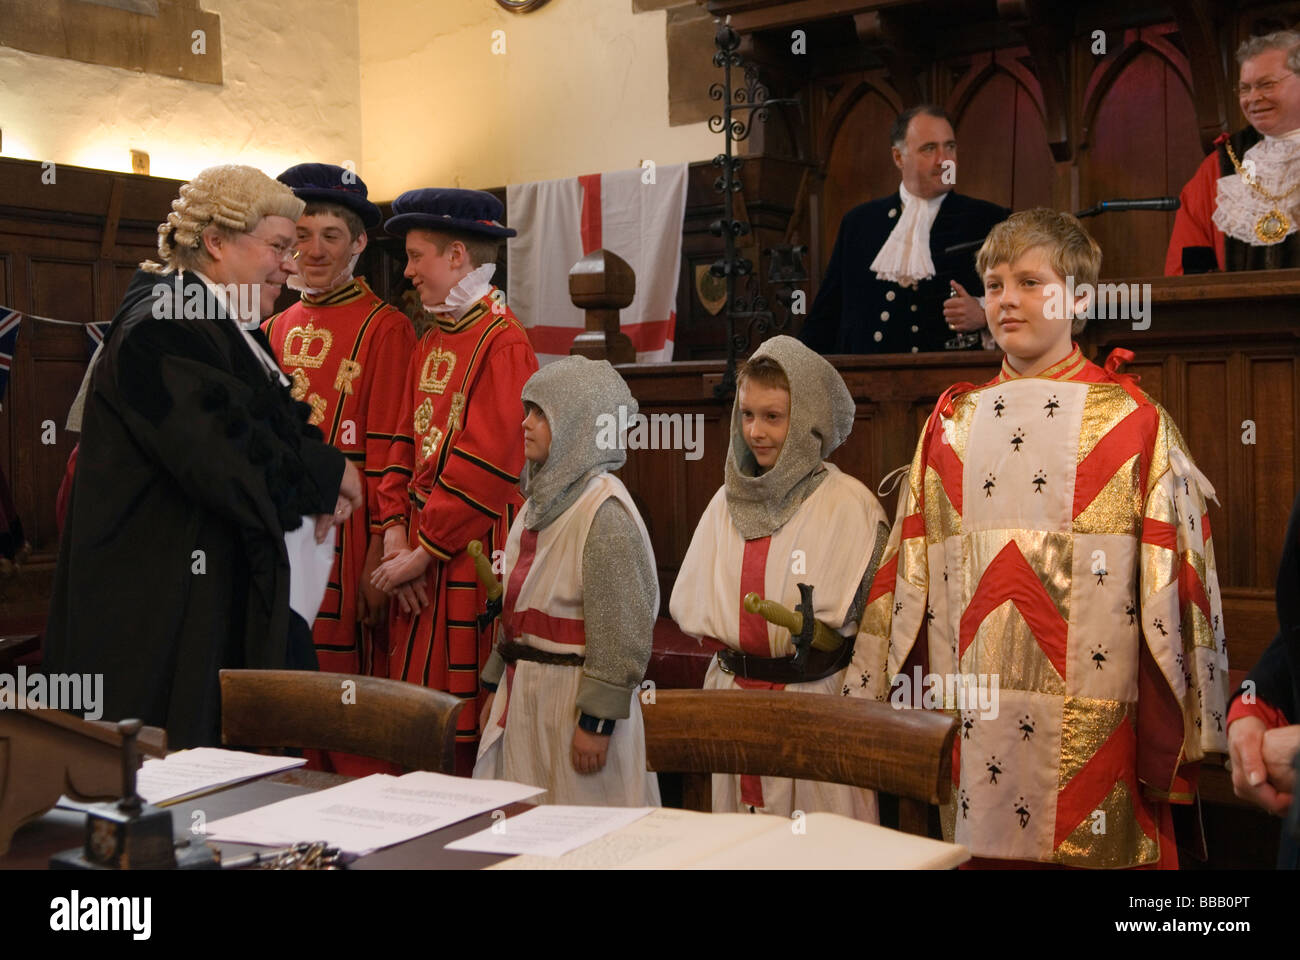 Court of Arraye Inspection of Men and Arms Lichfield Greenhill Bower Interior The Guildhall Lichfield Staffordshire England 2009 2000s UK HOMER SYKES Stockfoto